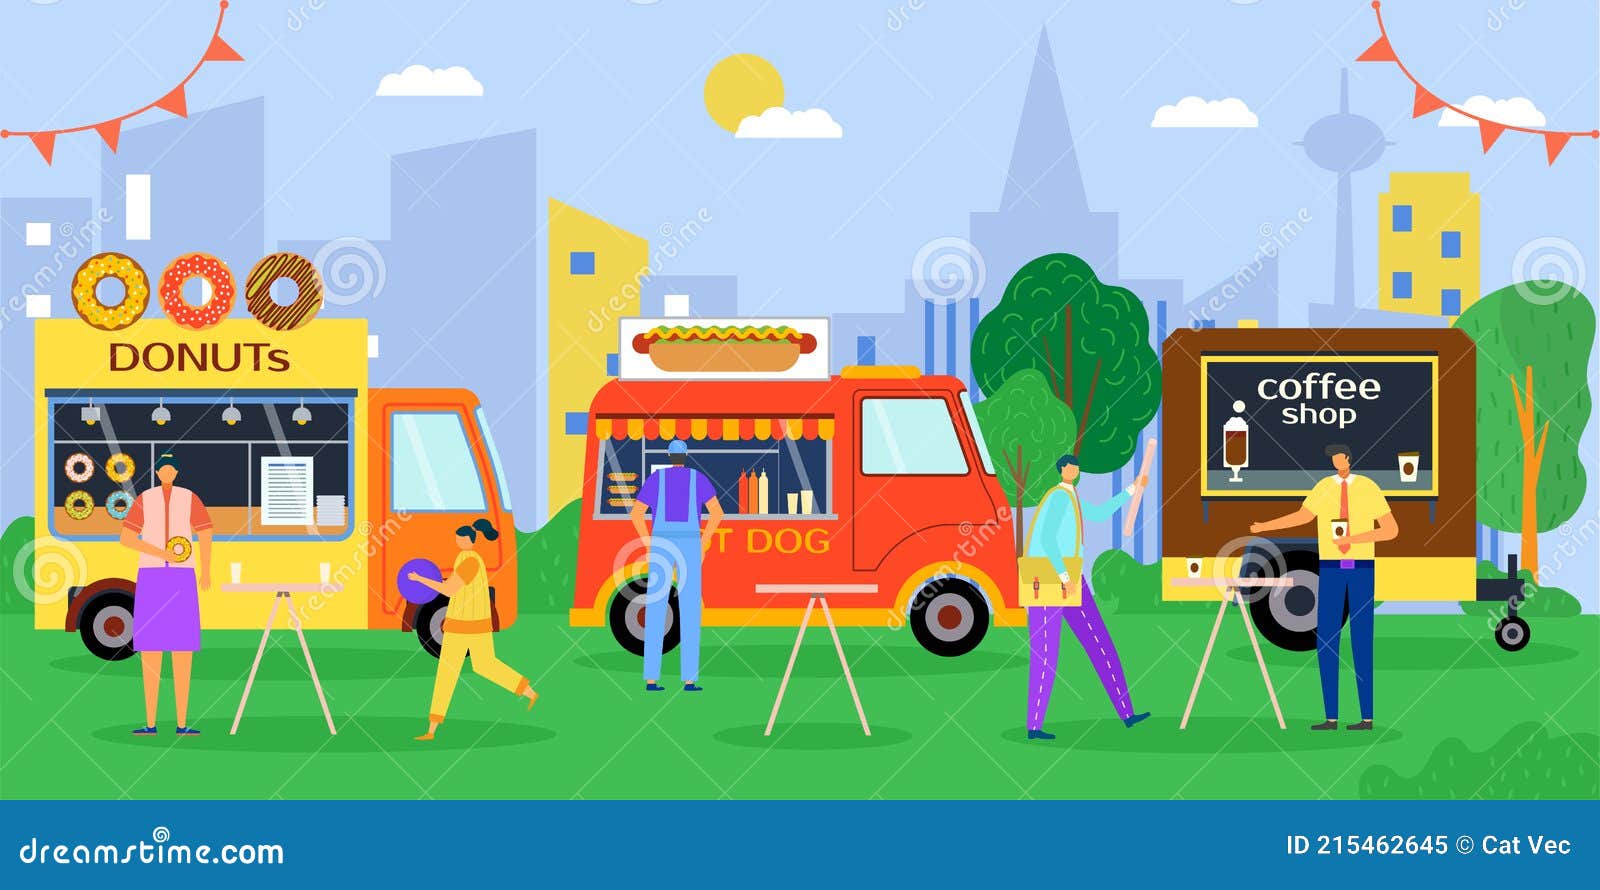 Street Food in Park, Vector Illustration. People Walk Outdoor Near Food  Truck, Flat City Festival with Cartoon Shops Stock Vector - Illustration of  snack, woman: 215462645